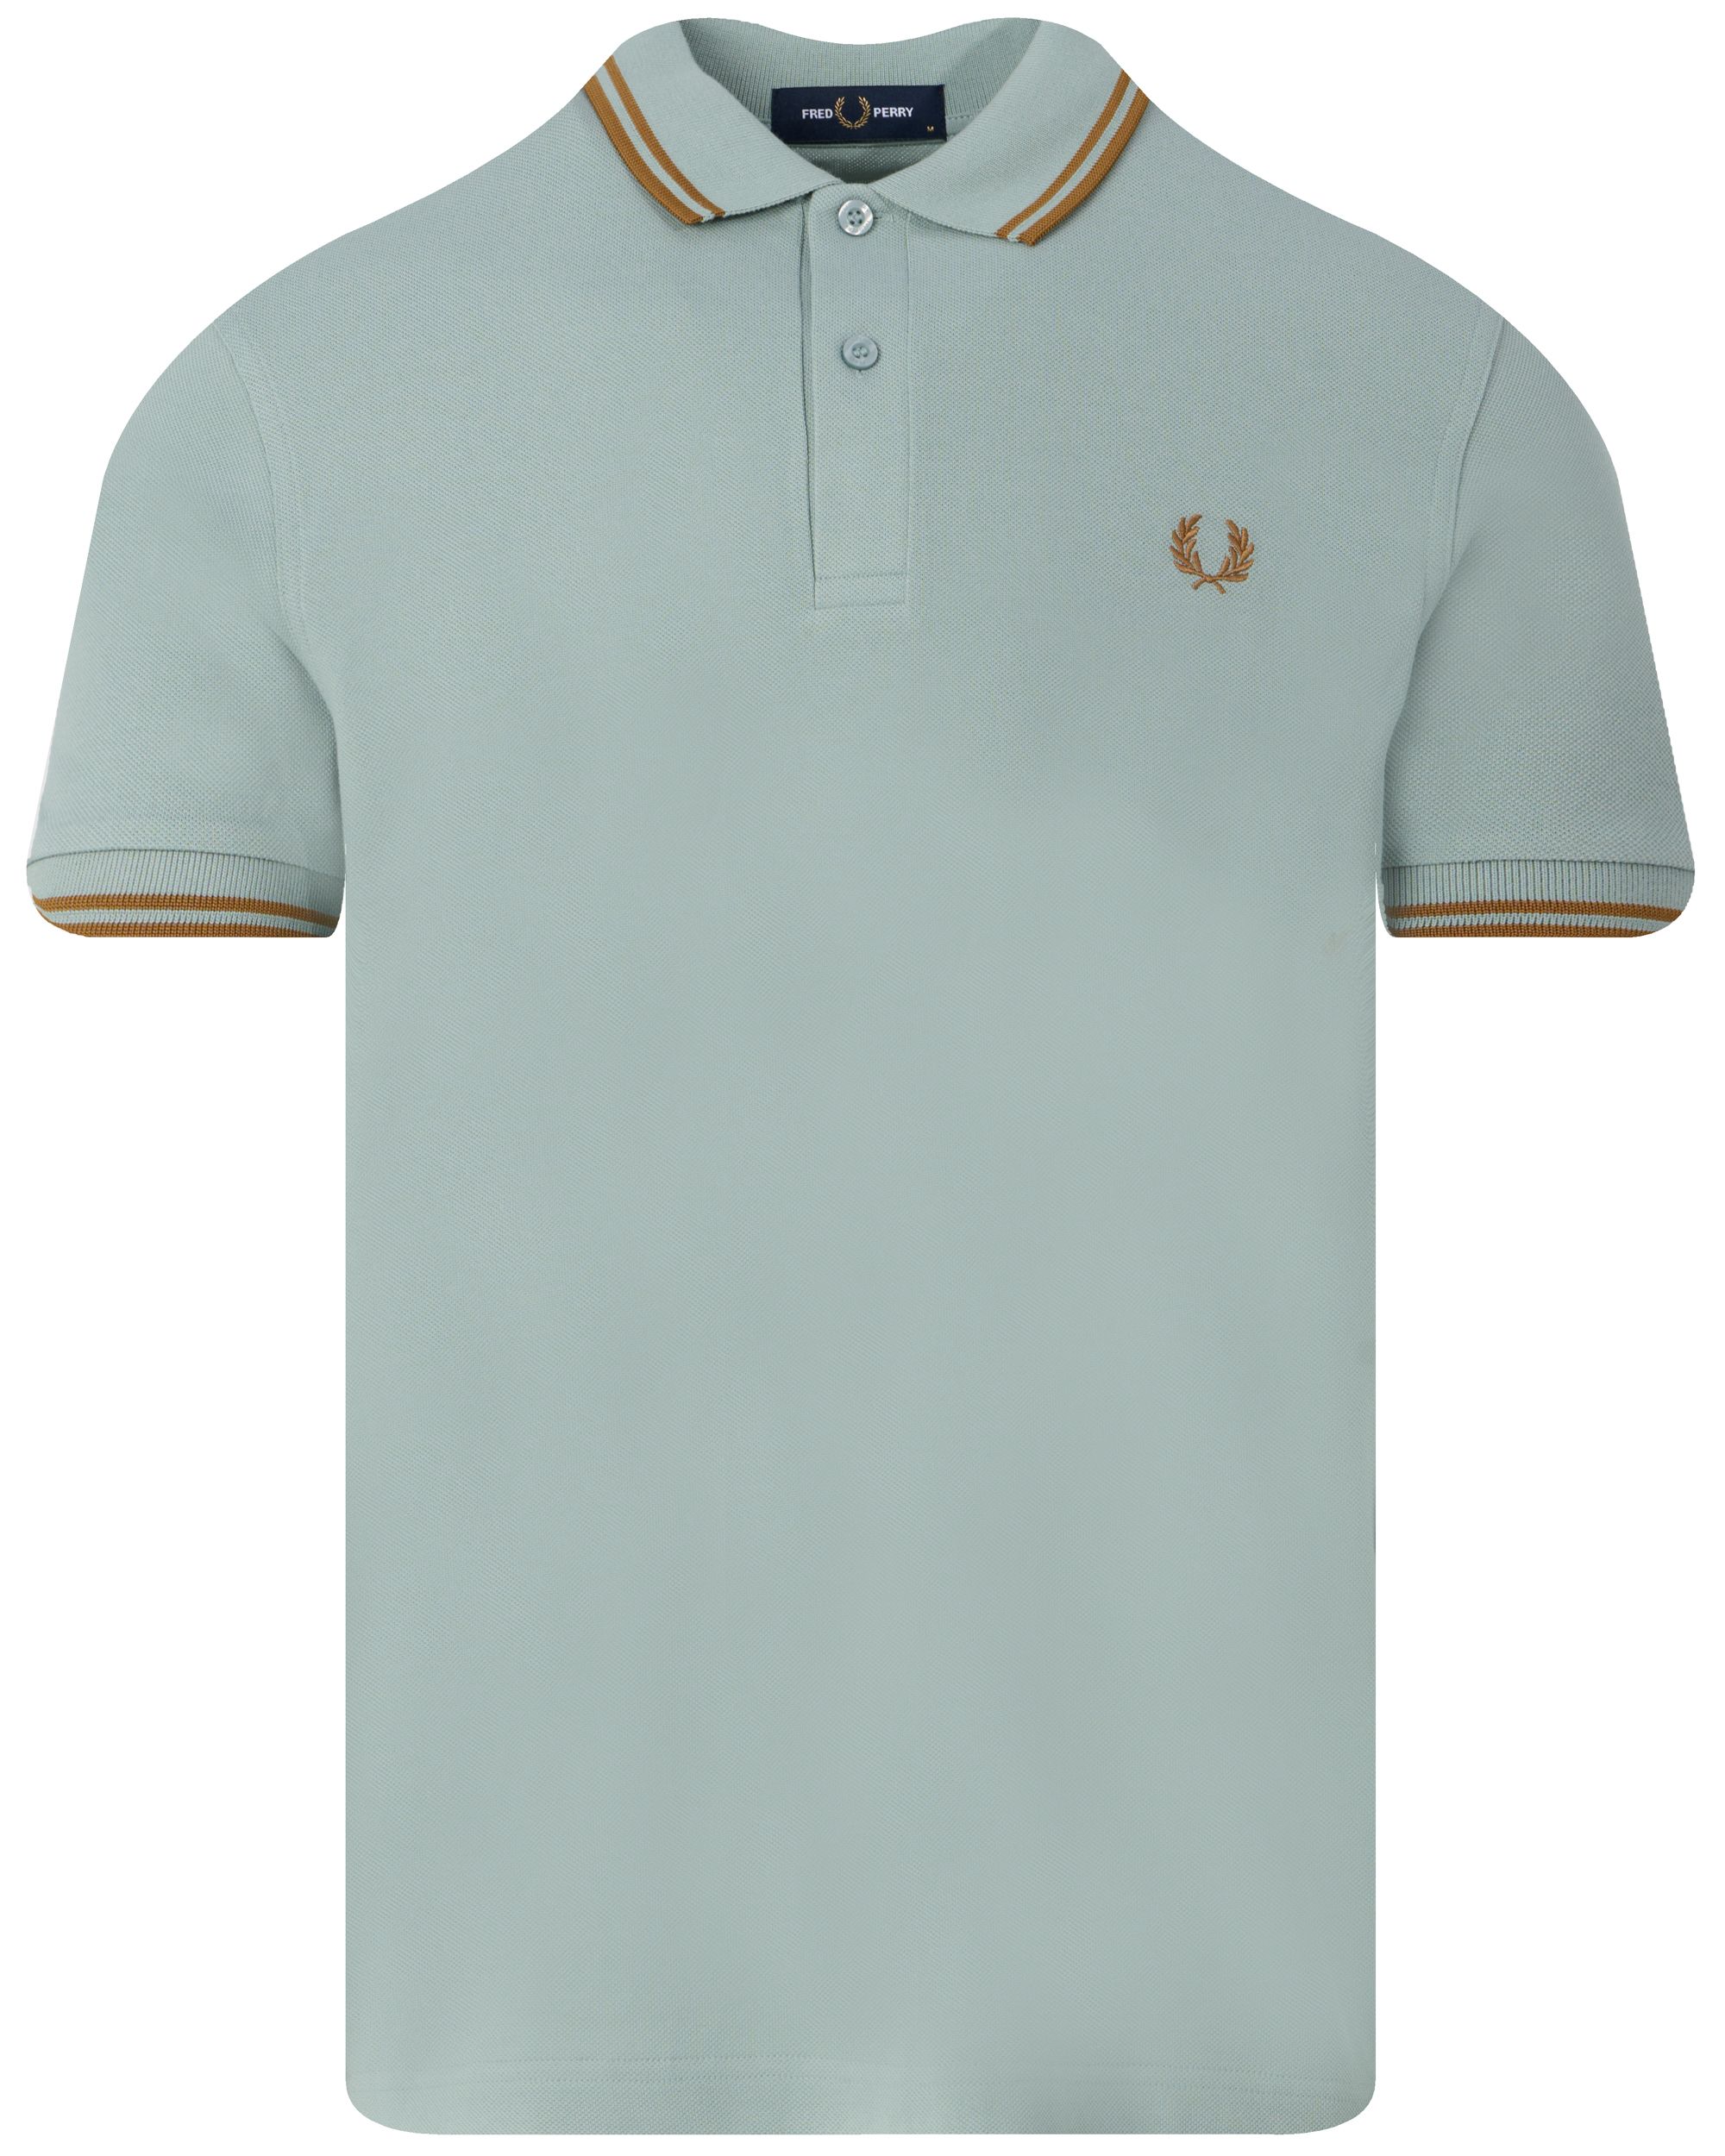 Fred Perry Polo KM Blauw 095671-001-L